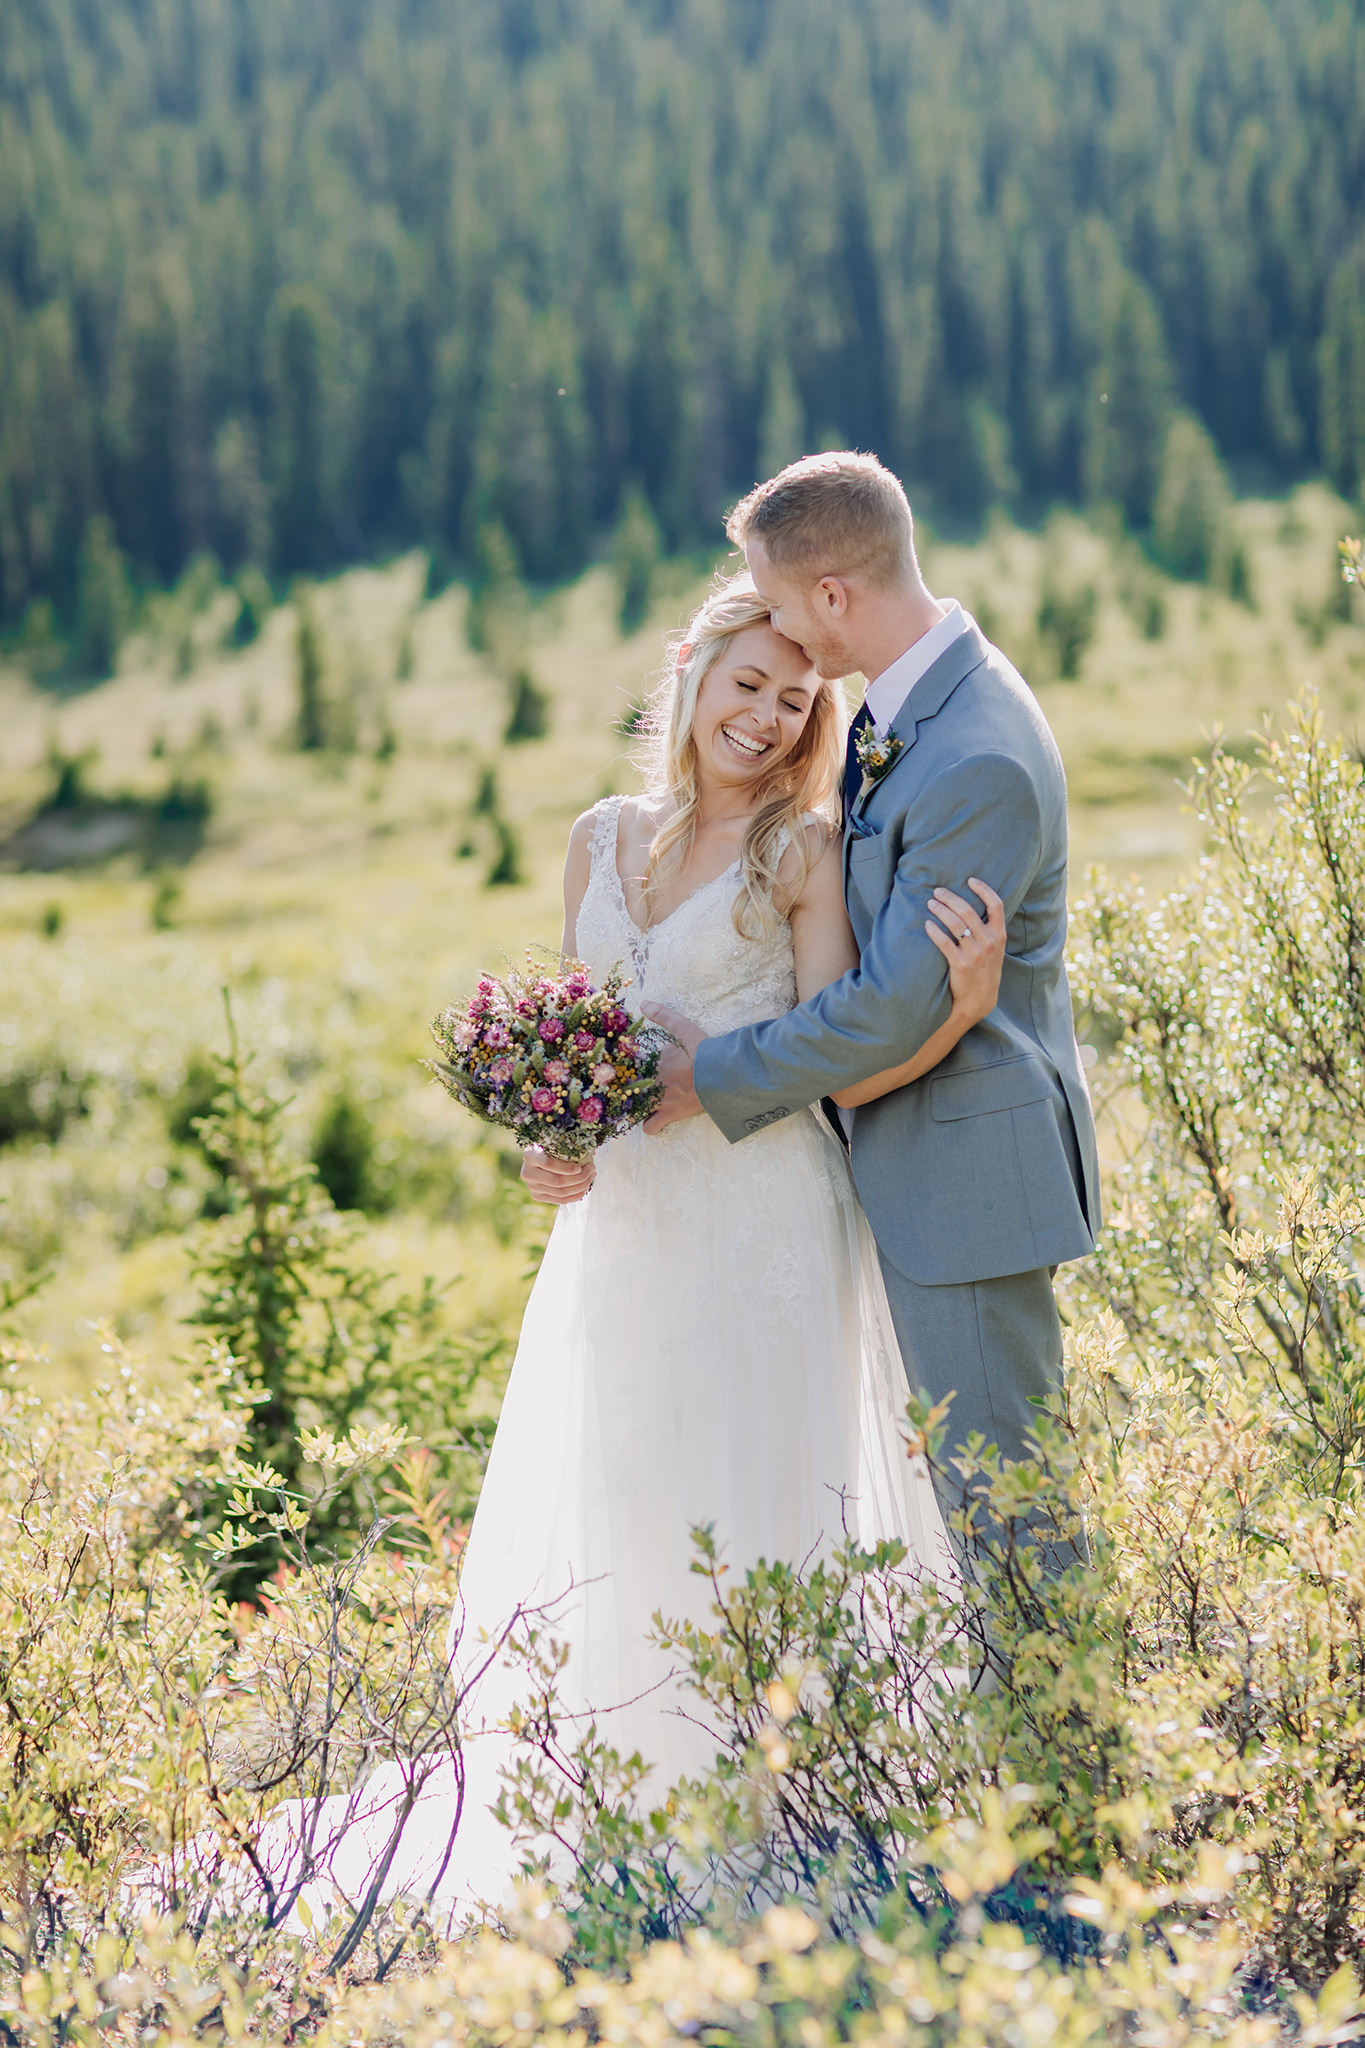 Exploring Icefields Parkway in Banff National Park on their wedding day. Summer mountain elopement off the beaten path photographed by local wedding & elopement photographer ENV Photography 